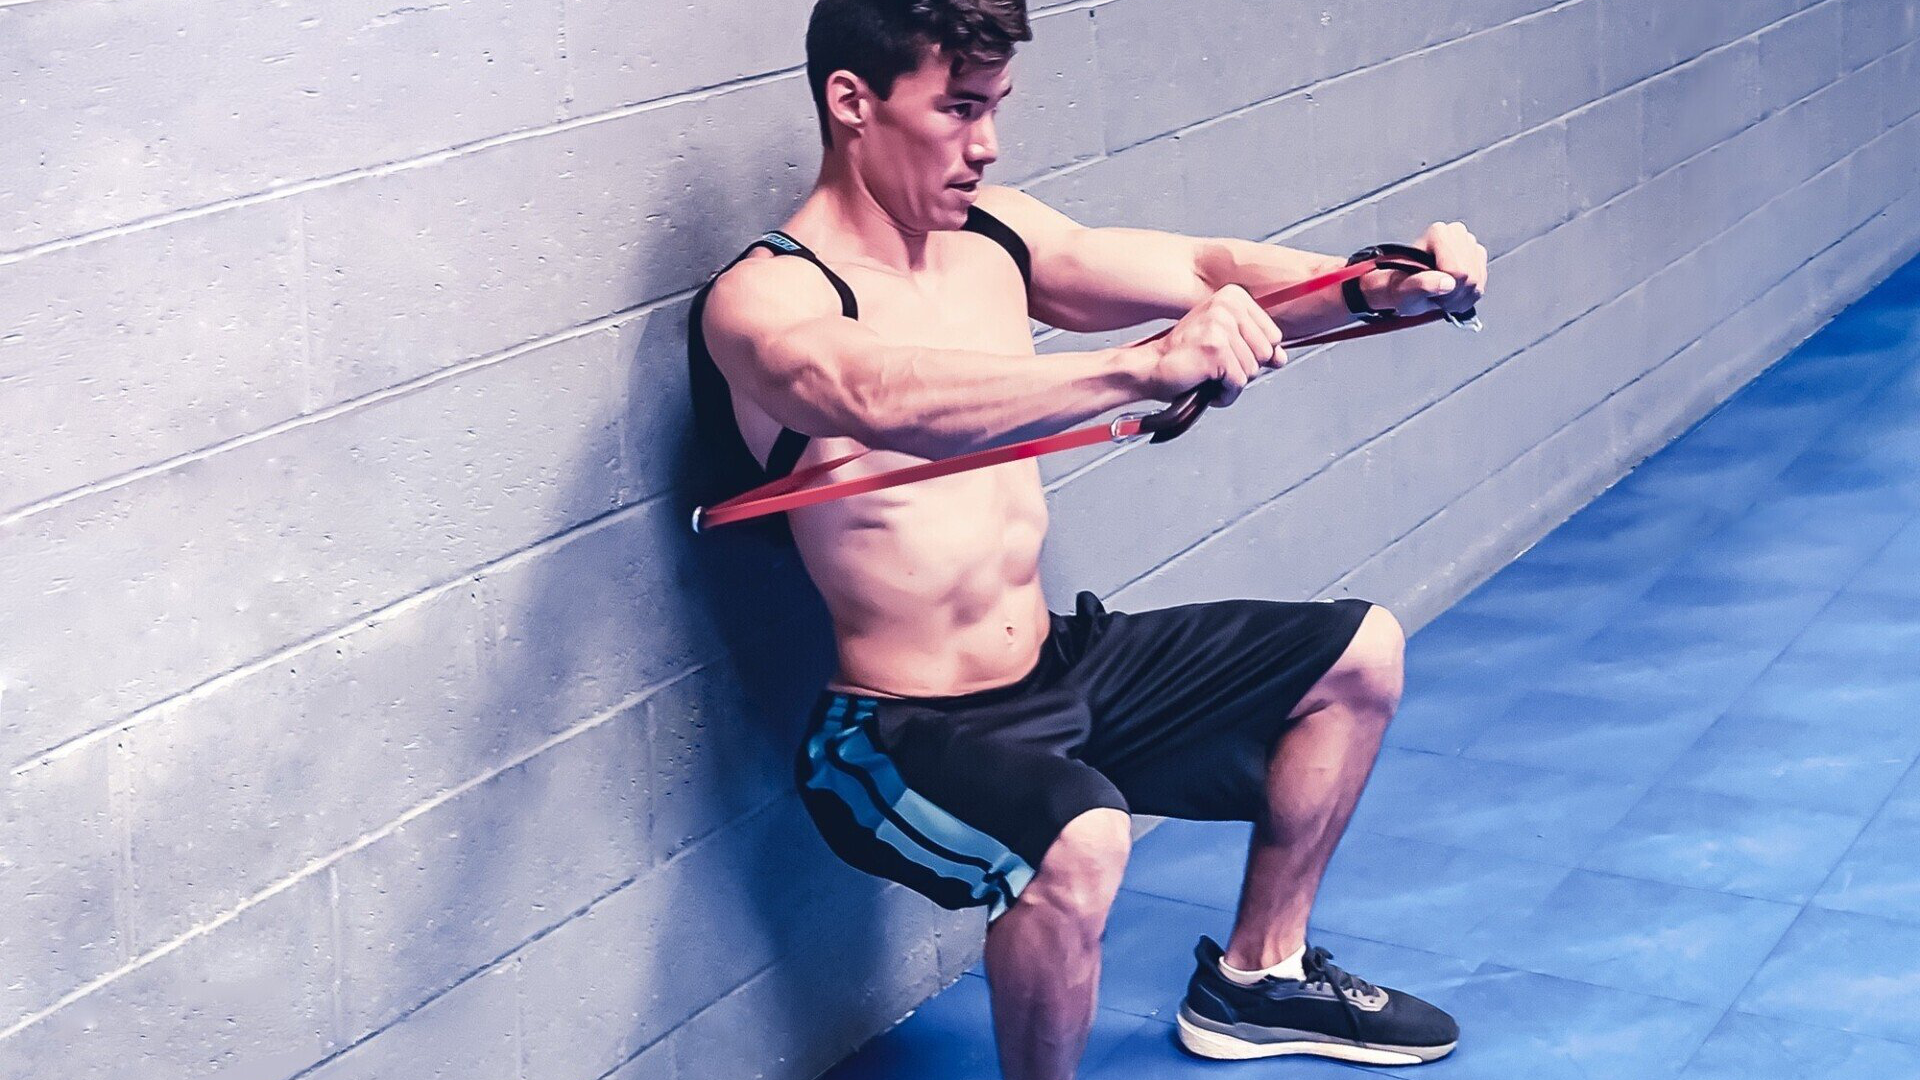 Shows a man wearing the SmithShaper SQUATX multipurpose combination exerciser where he performs rolling wall squats while simultaneously doing resistance band chest presses with SmithShaper high-stretch loop resistance bands anchored on the SQUATX device.